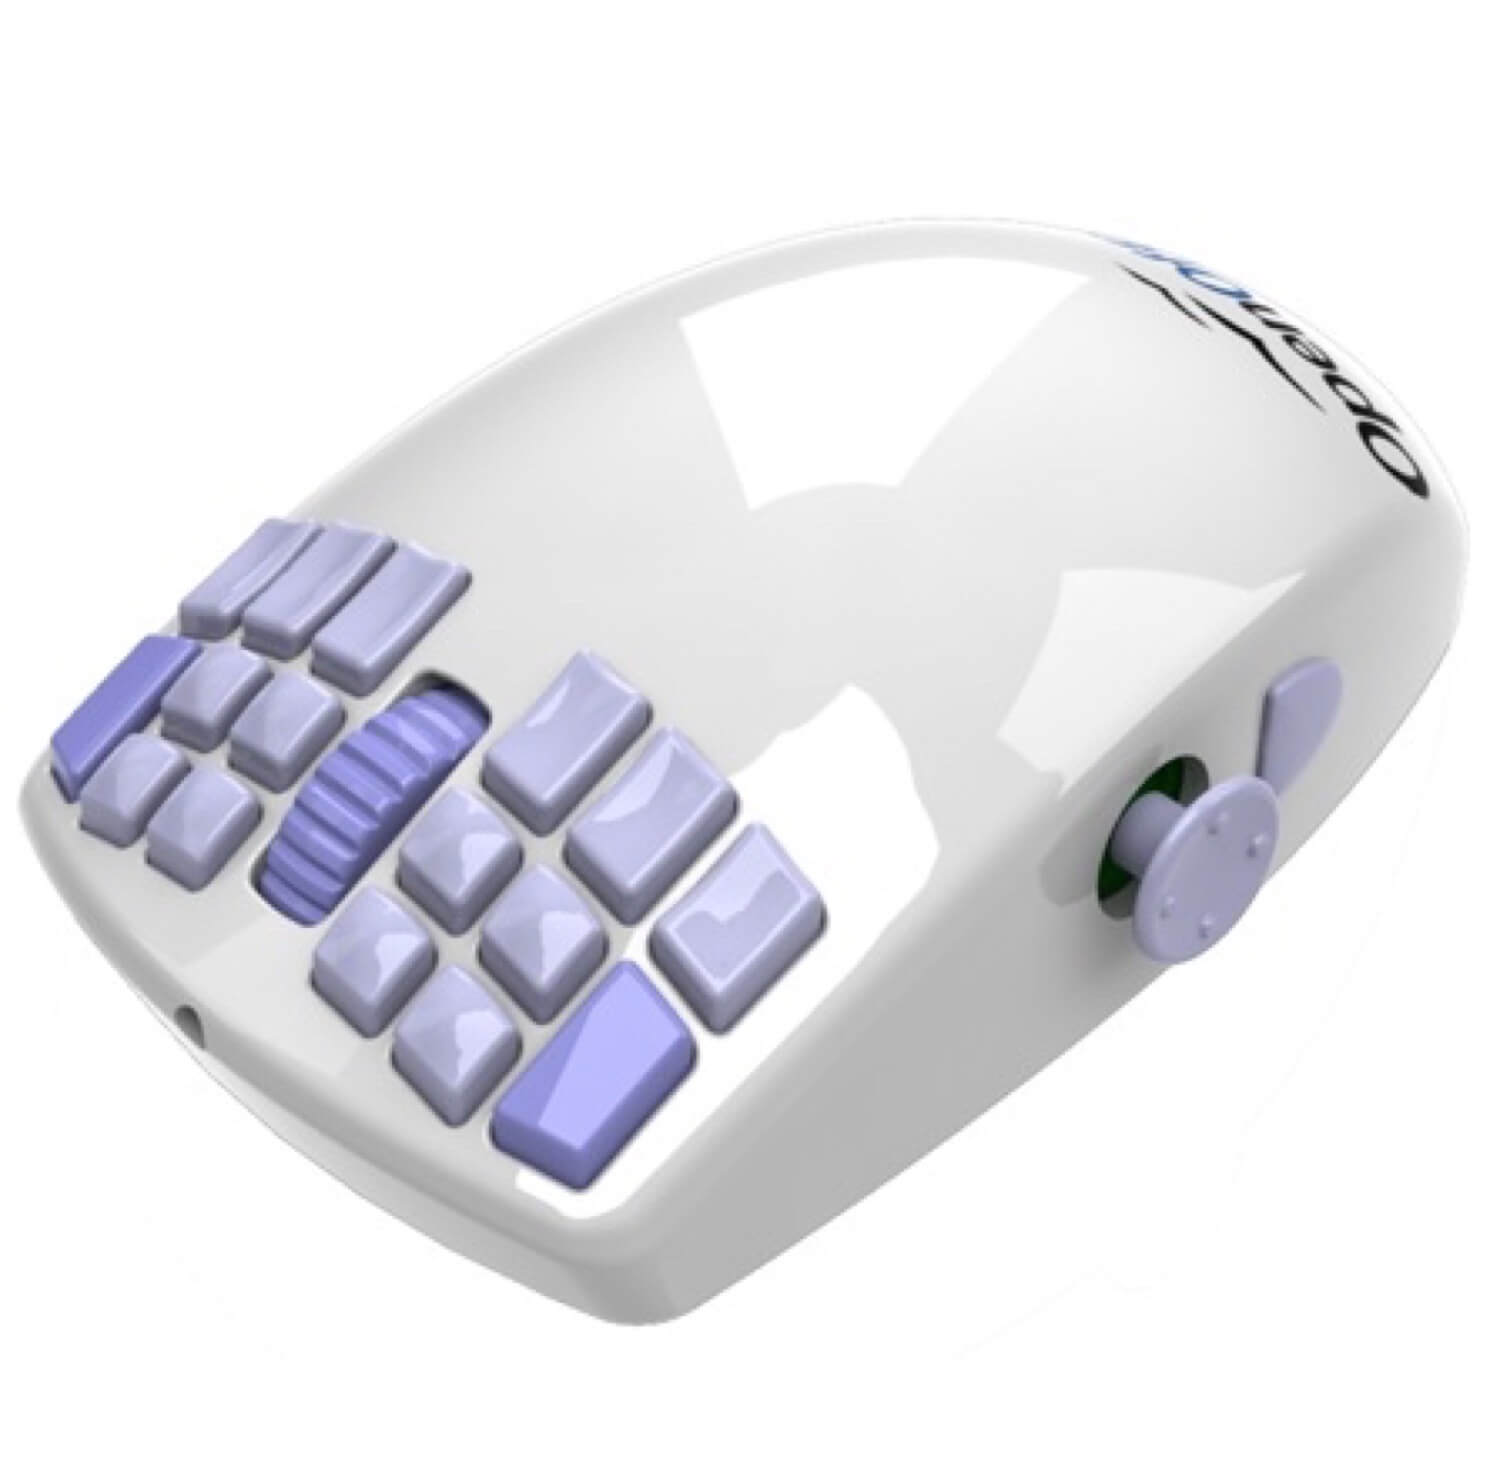 Removing features, noise and buttons to make your product perfect - like Apple Mighty Mouse 2